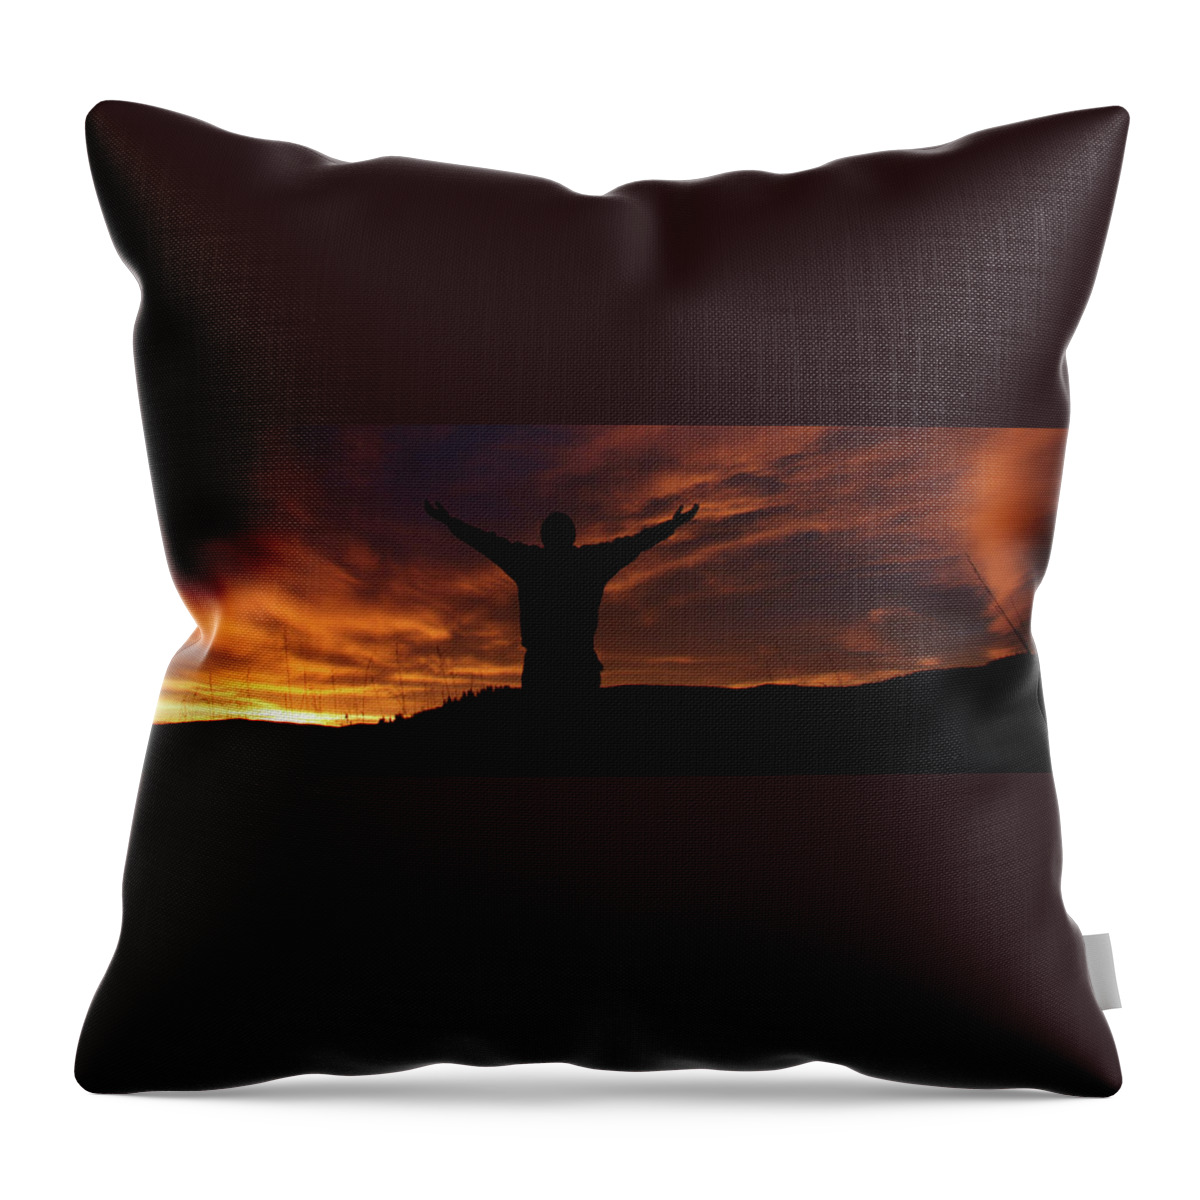 Disbelief Throw Pillow featuring the photograph Worship Silhouette by Imaginegolf